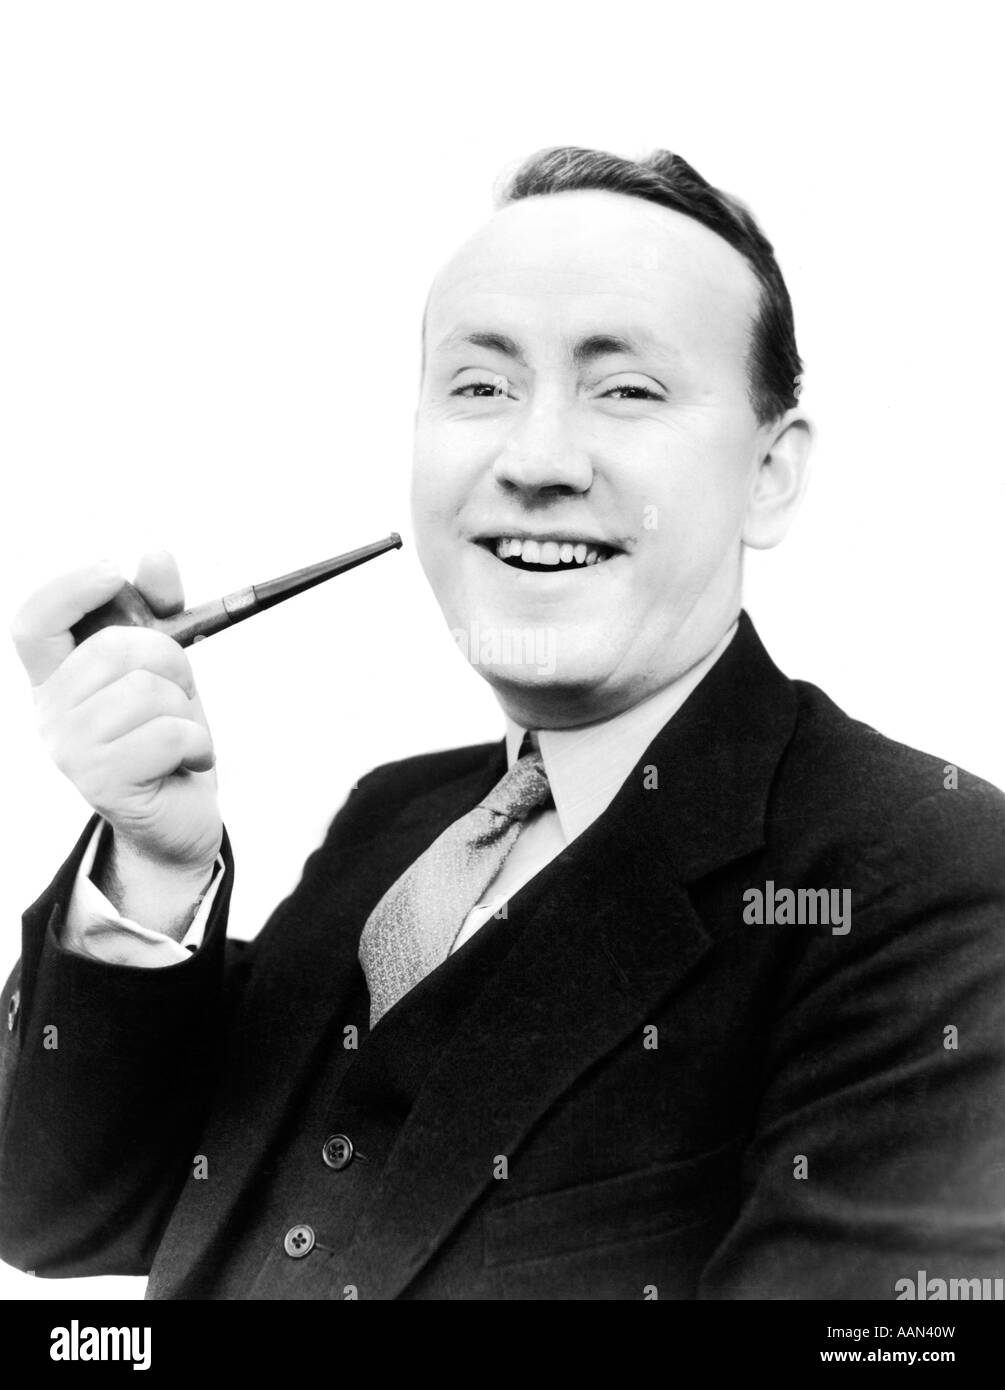 1940s 1930s MAN HOLDING PIPE IN HIS HAND SMILING LOOKING AT CAMERA DRESSED IN SUIT AND TIE SMOKING TOBACCO Stock Photo